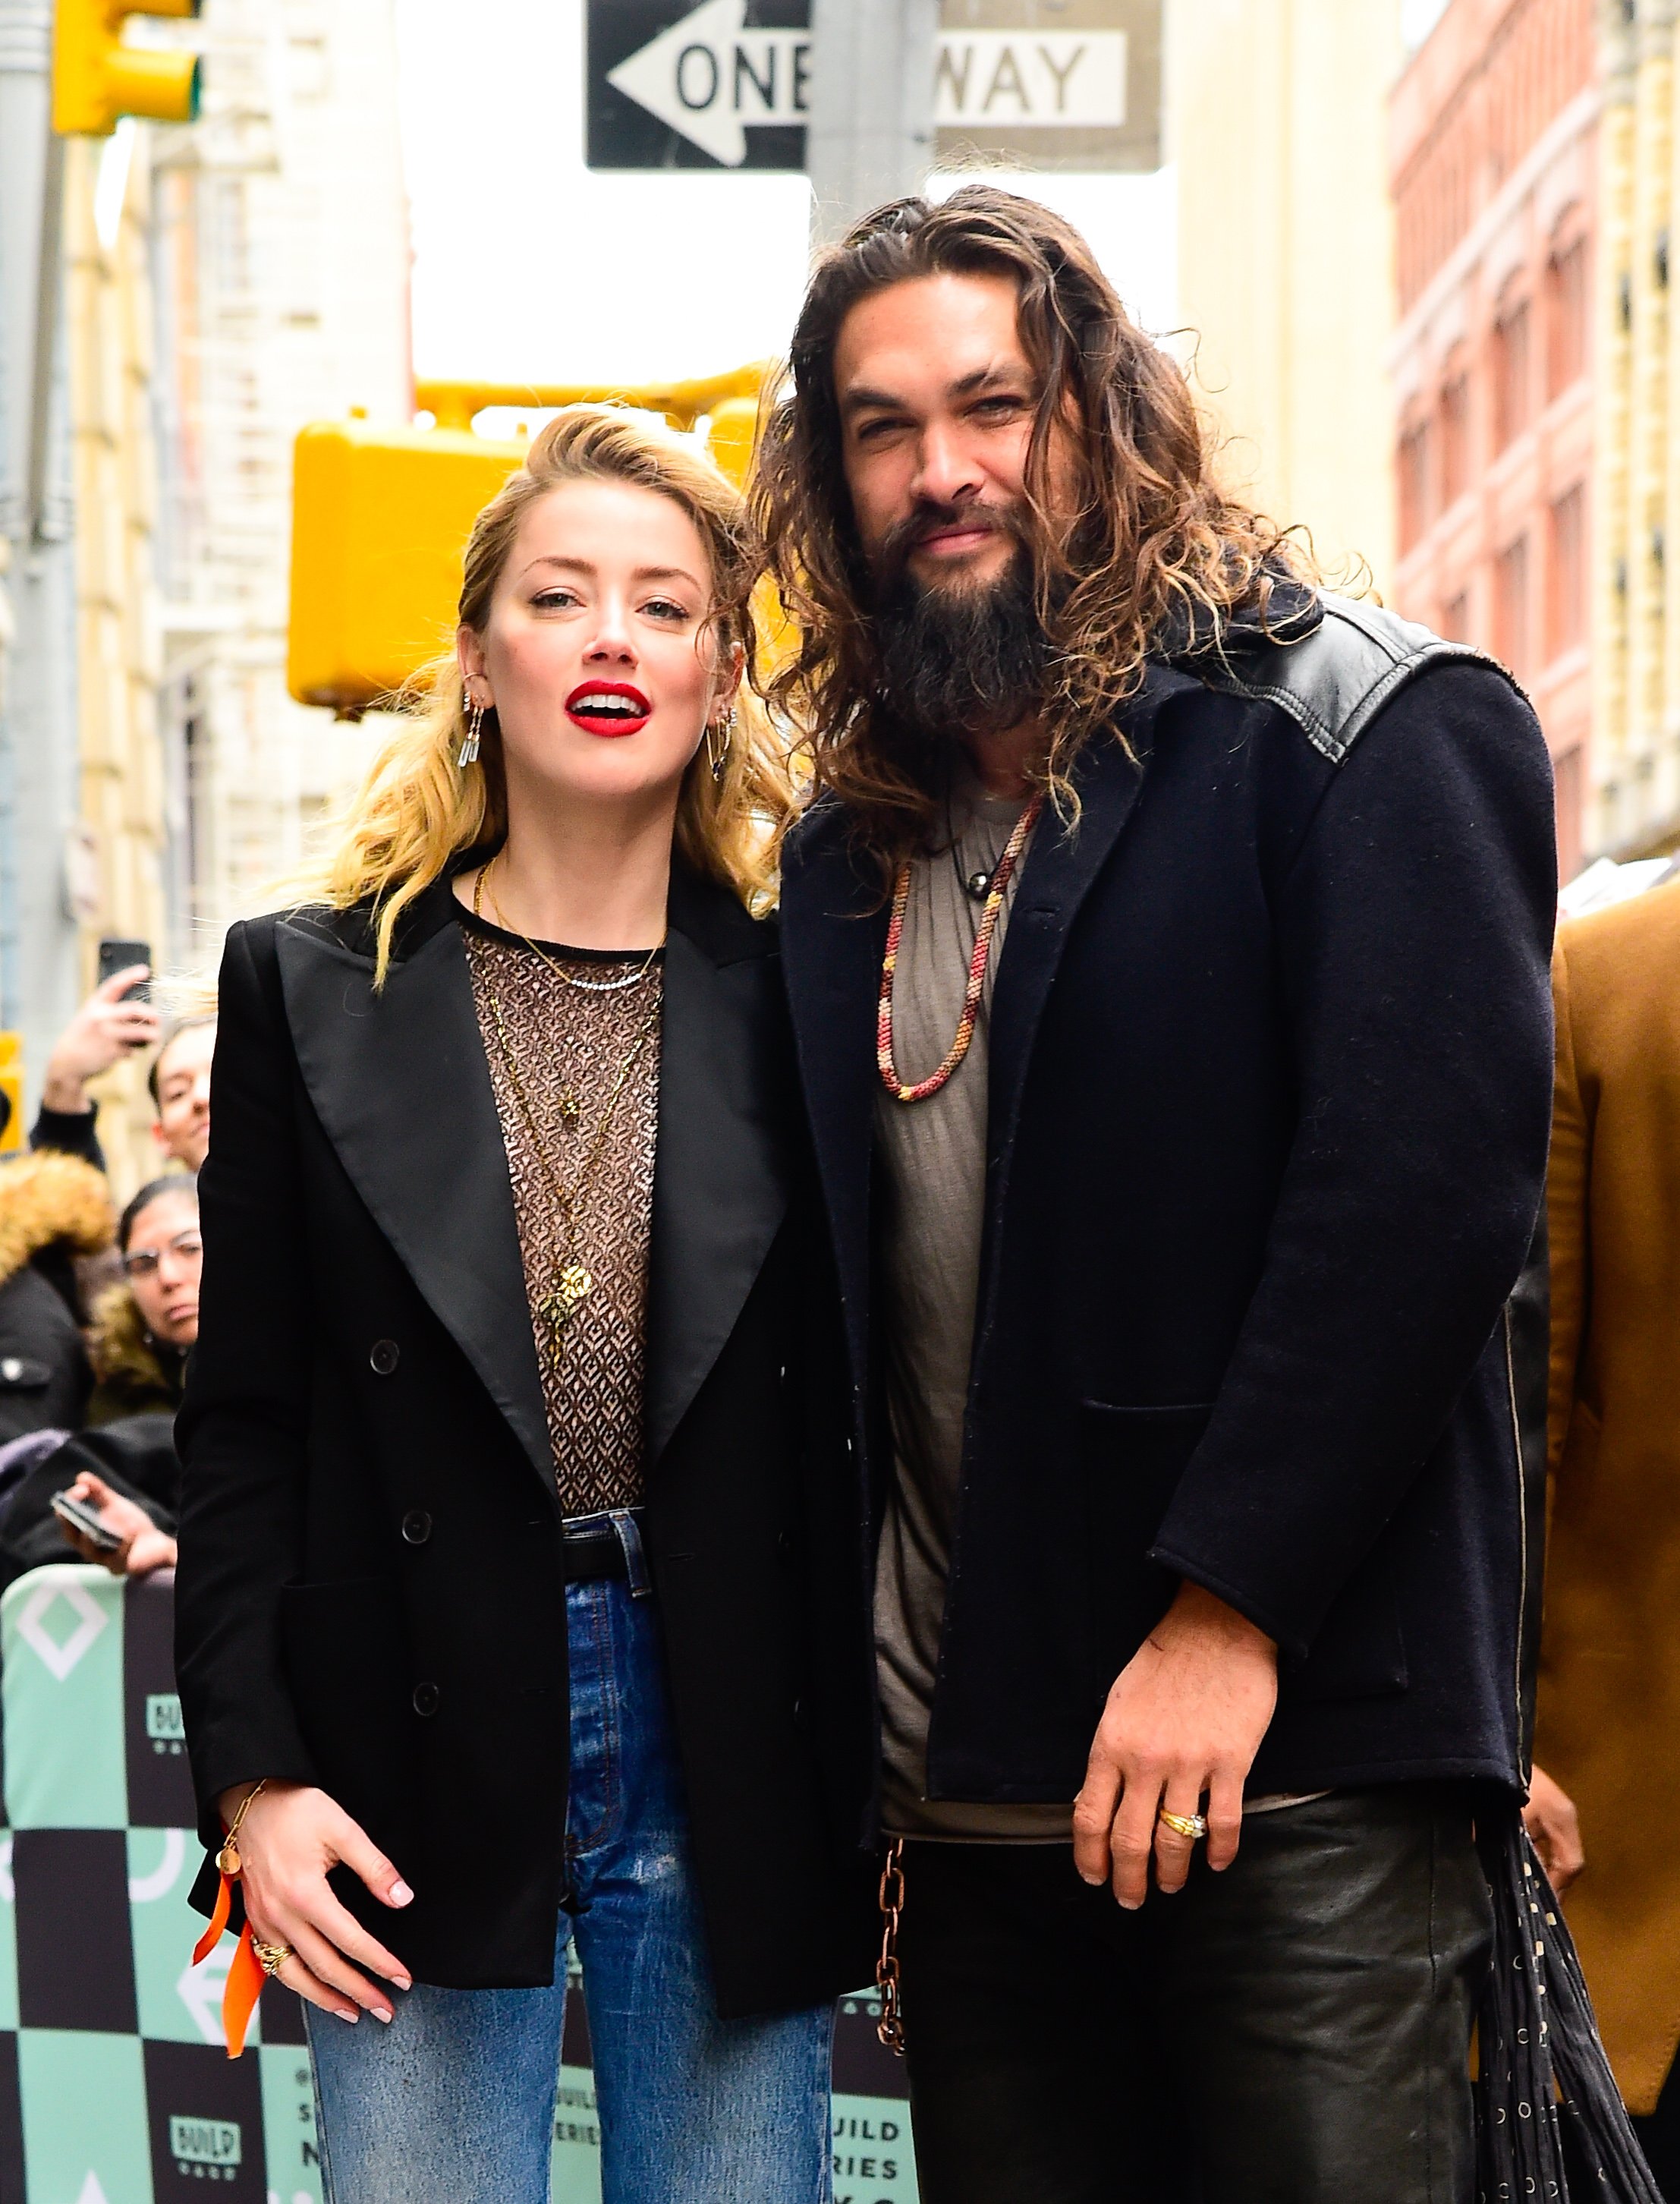 Amber Heard and Jason Momoa on the streets of New York on December 3, 2018 | Source: Getty Images